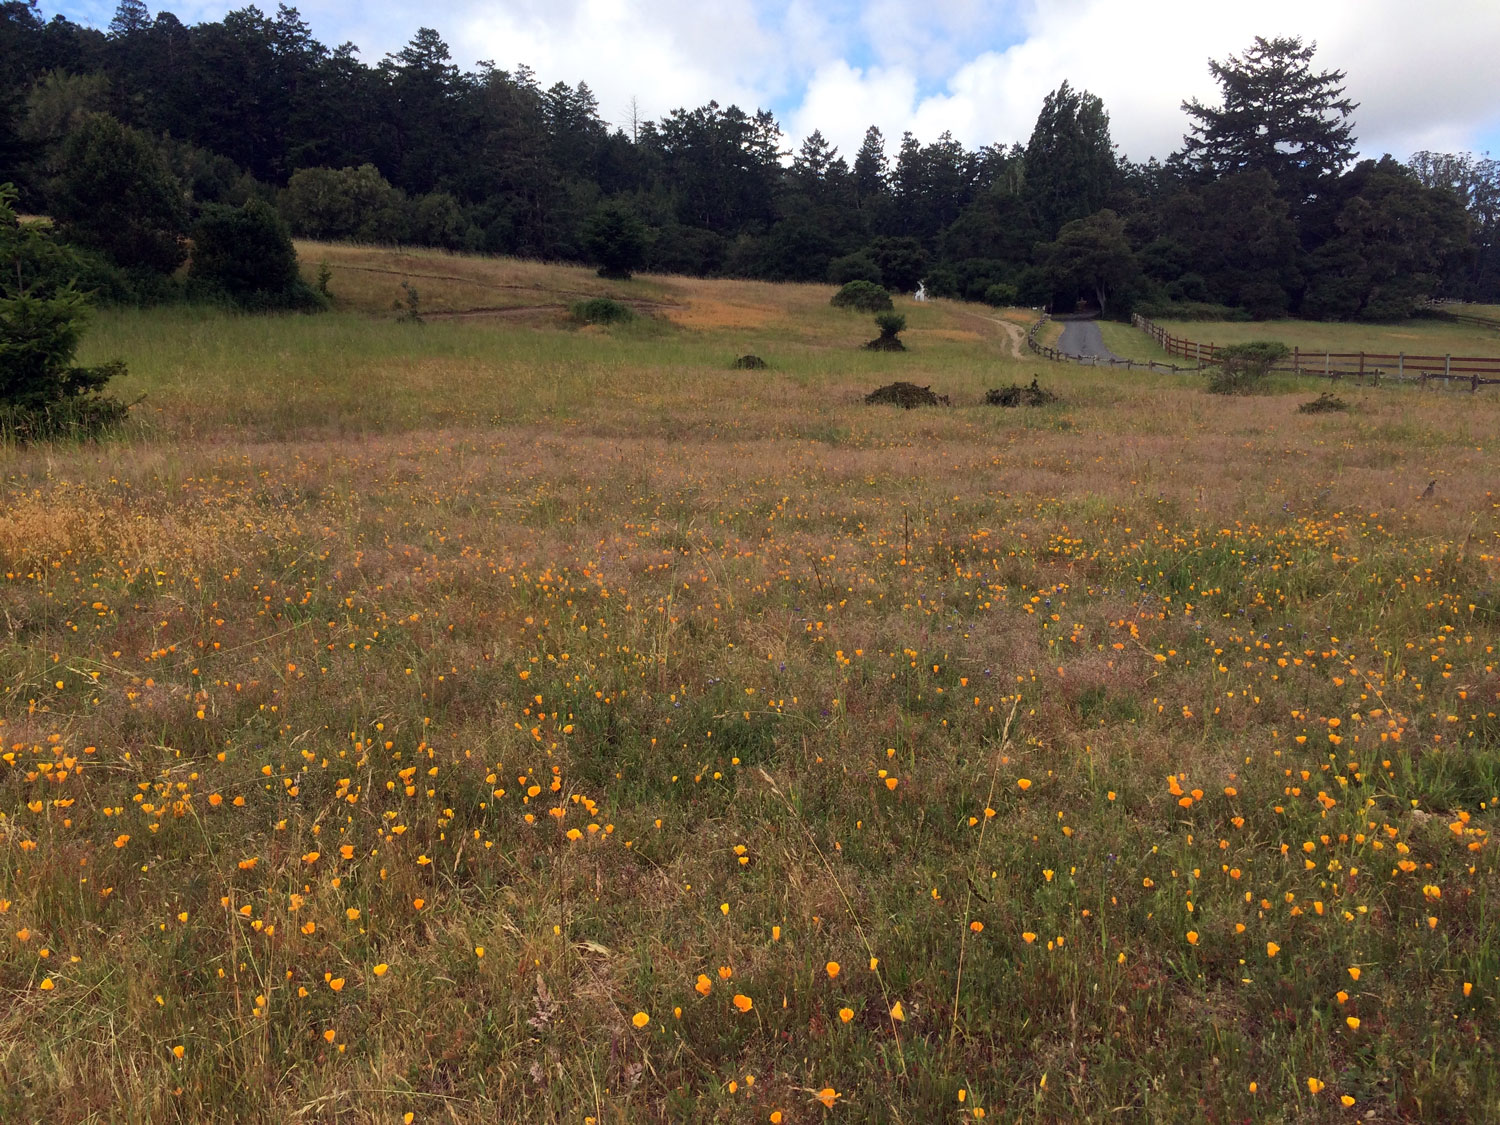 Meadow between the Bear Valley Trail and horse ranch